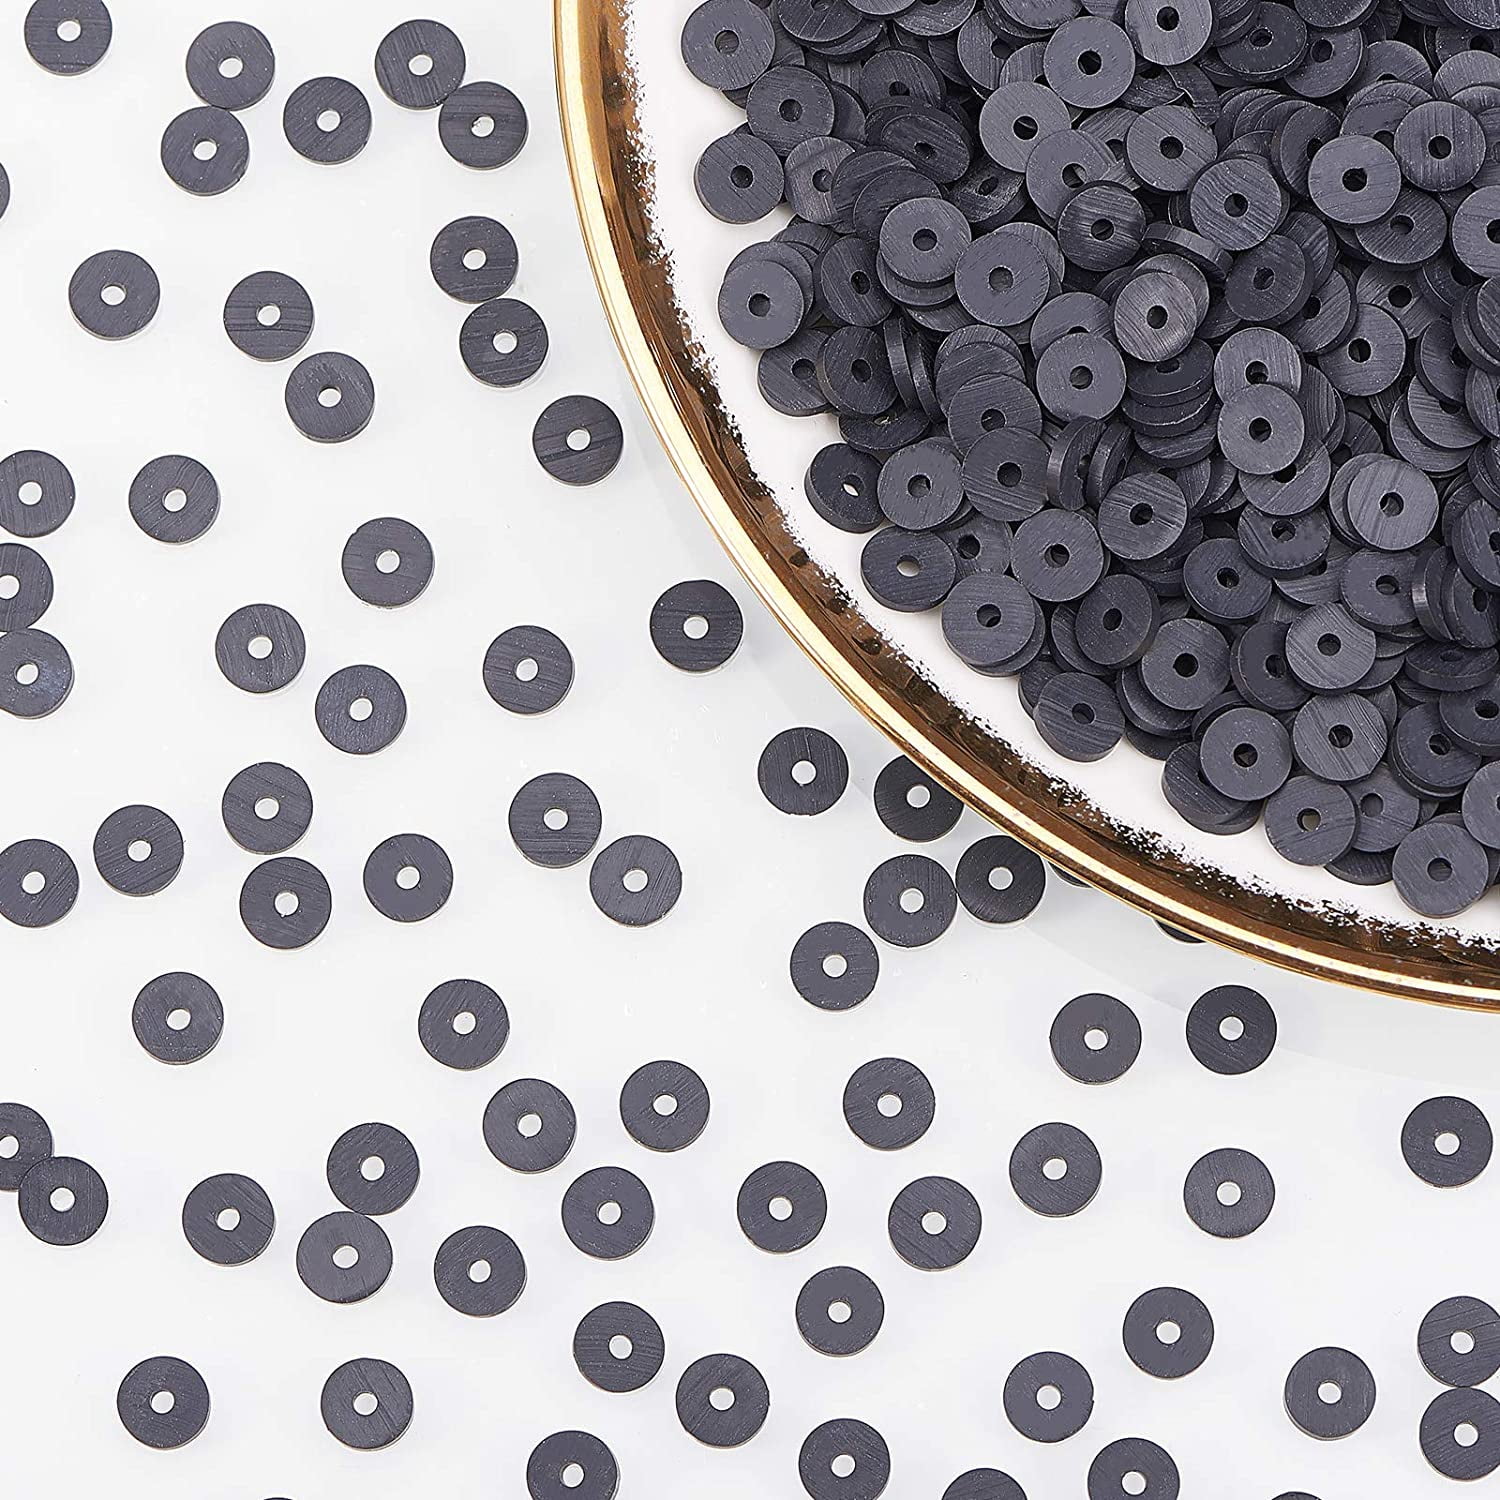 Black Heishi Clay Beads 3000 Pcs 6mm Vinyl Disc Beads Flat Round Handmade  Polymer Clay Beads for Hawaiian Earring Choker Anklet Bracelet Necklace  Jewelry Making Halloween Decor 